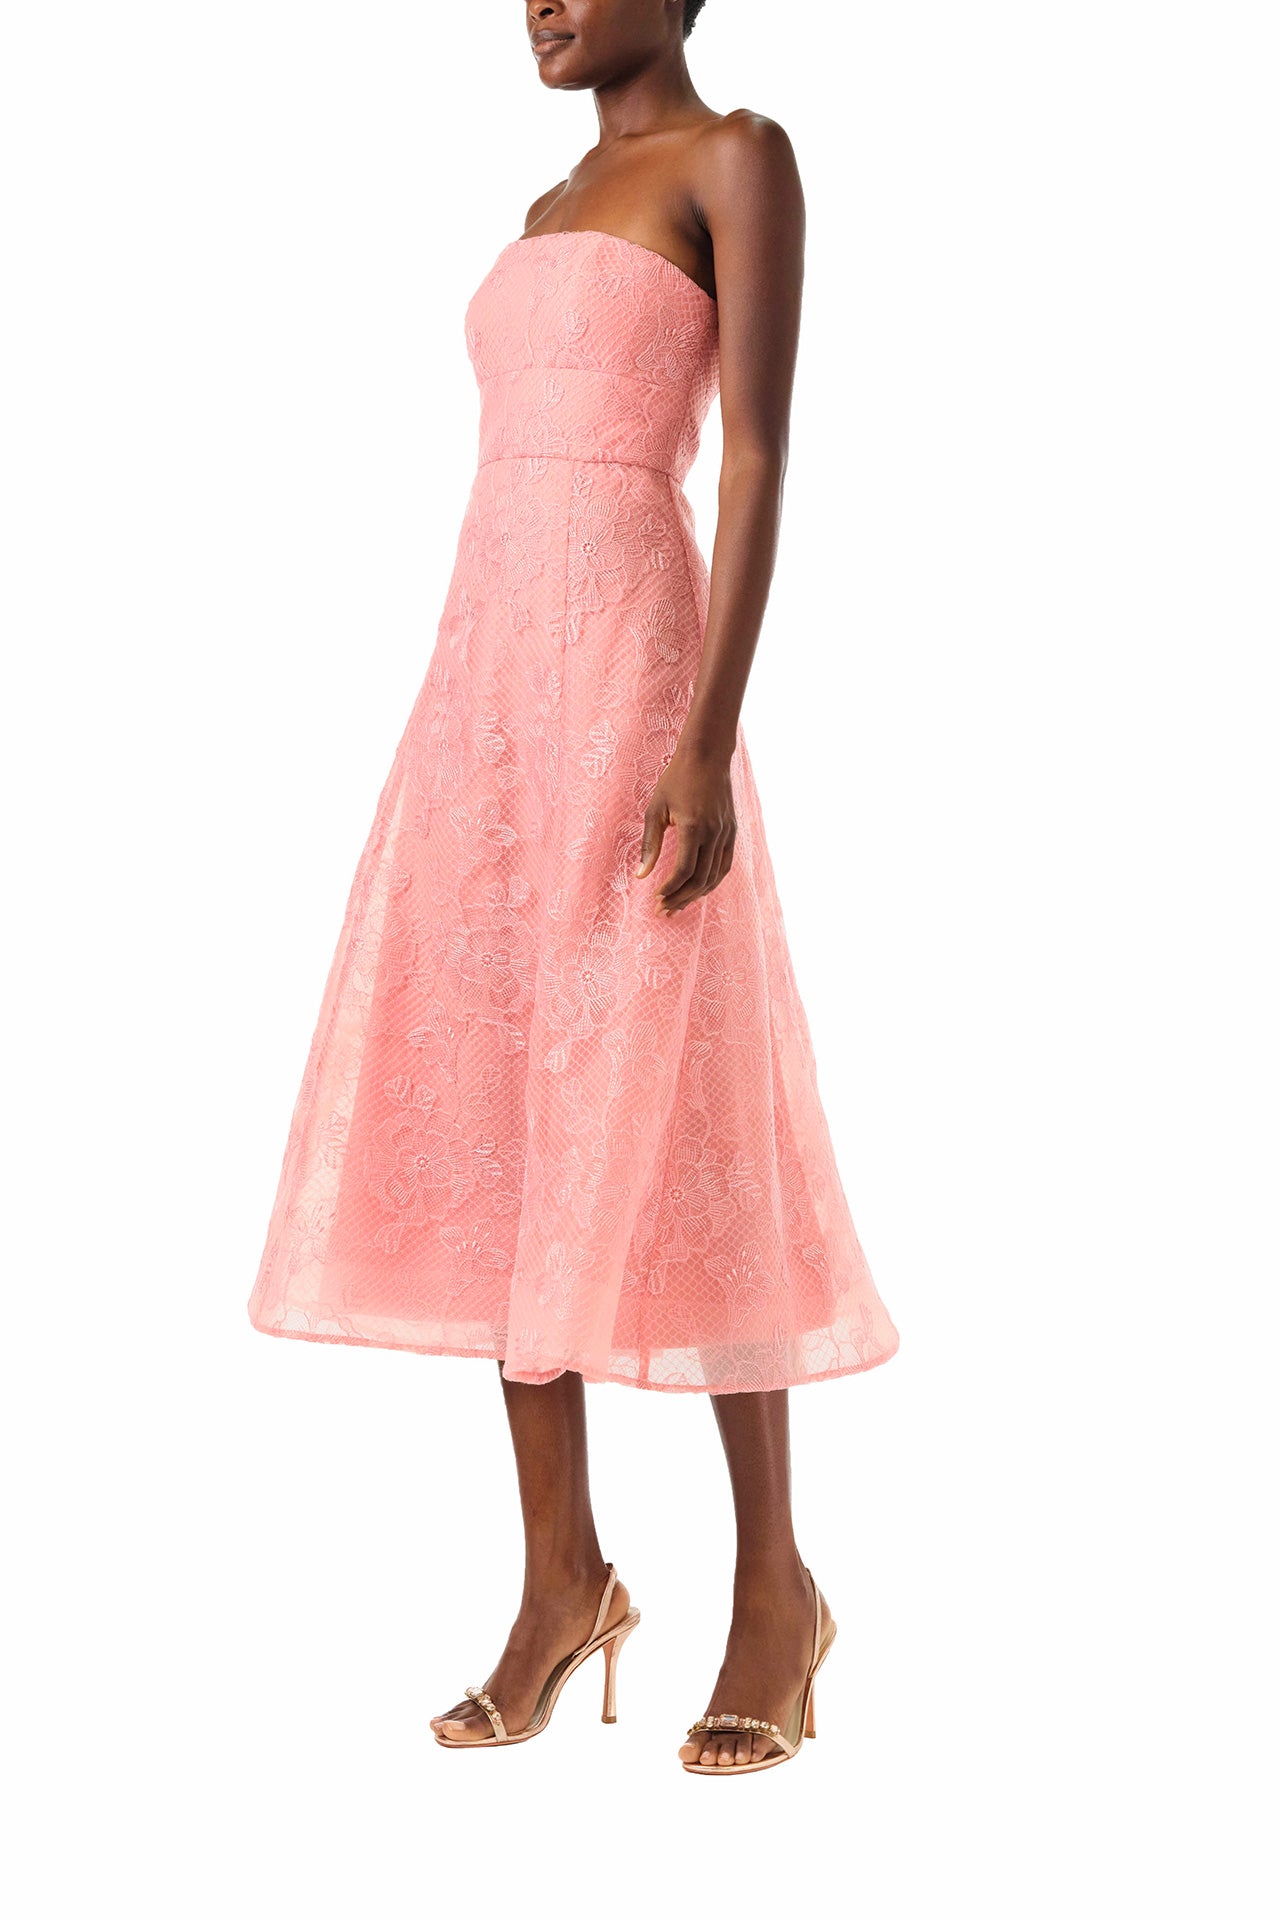 ML Monique Lhuillier 2024 strapless midi dress with flared skirt in Coral Rose embroidered lace - left side.